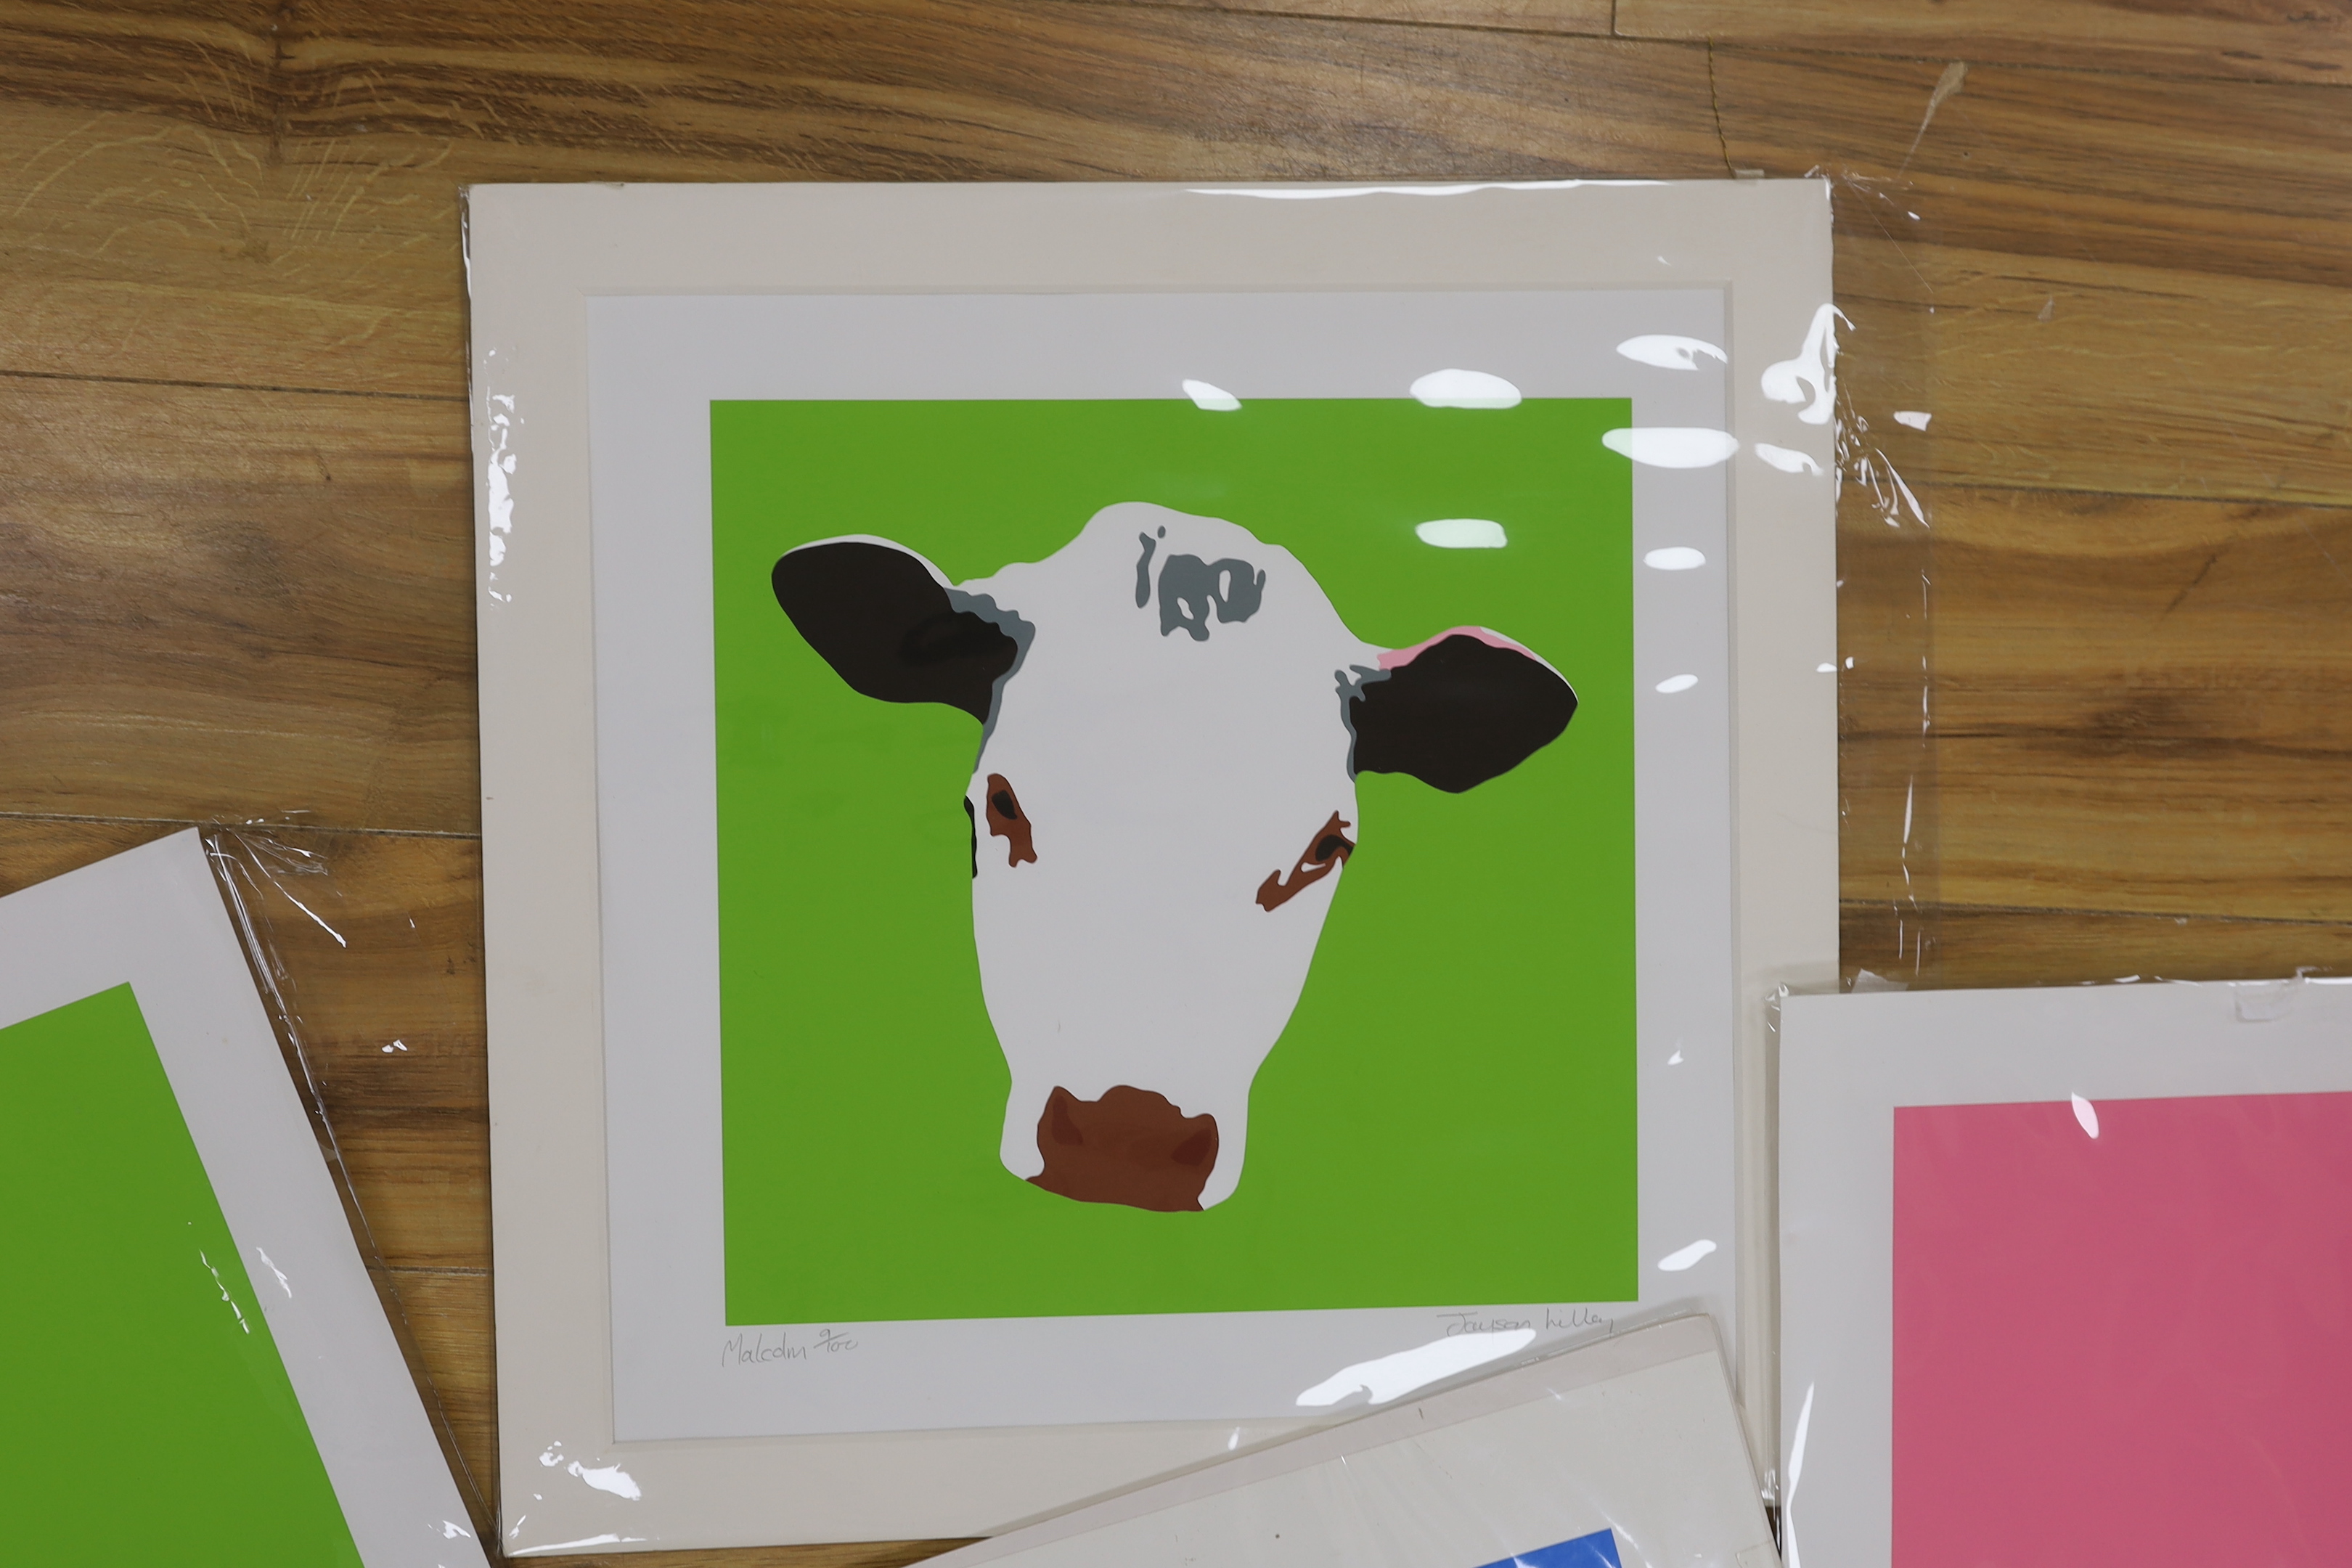 Jayson Lilley (b.1972), set of five contemporary colour screenprints, Cows including 'Mooocow Green' limited edition 59/99, and 'Isobel', limited edition 8/100, each signed in pencil, each 50 x 50cm, unframed